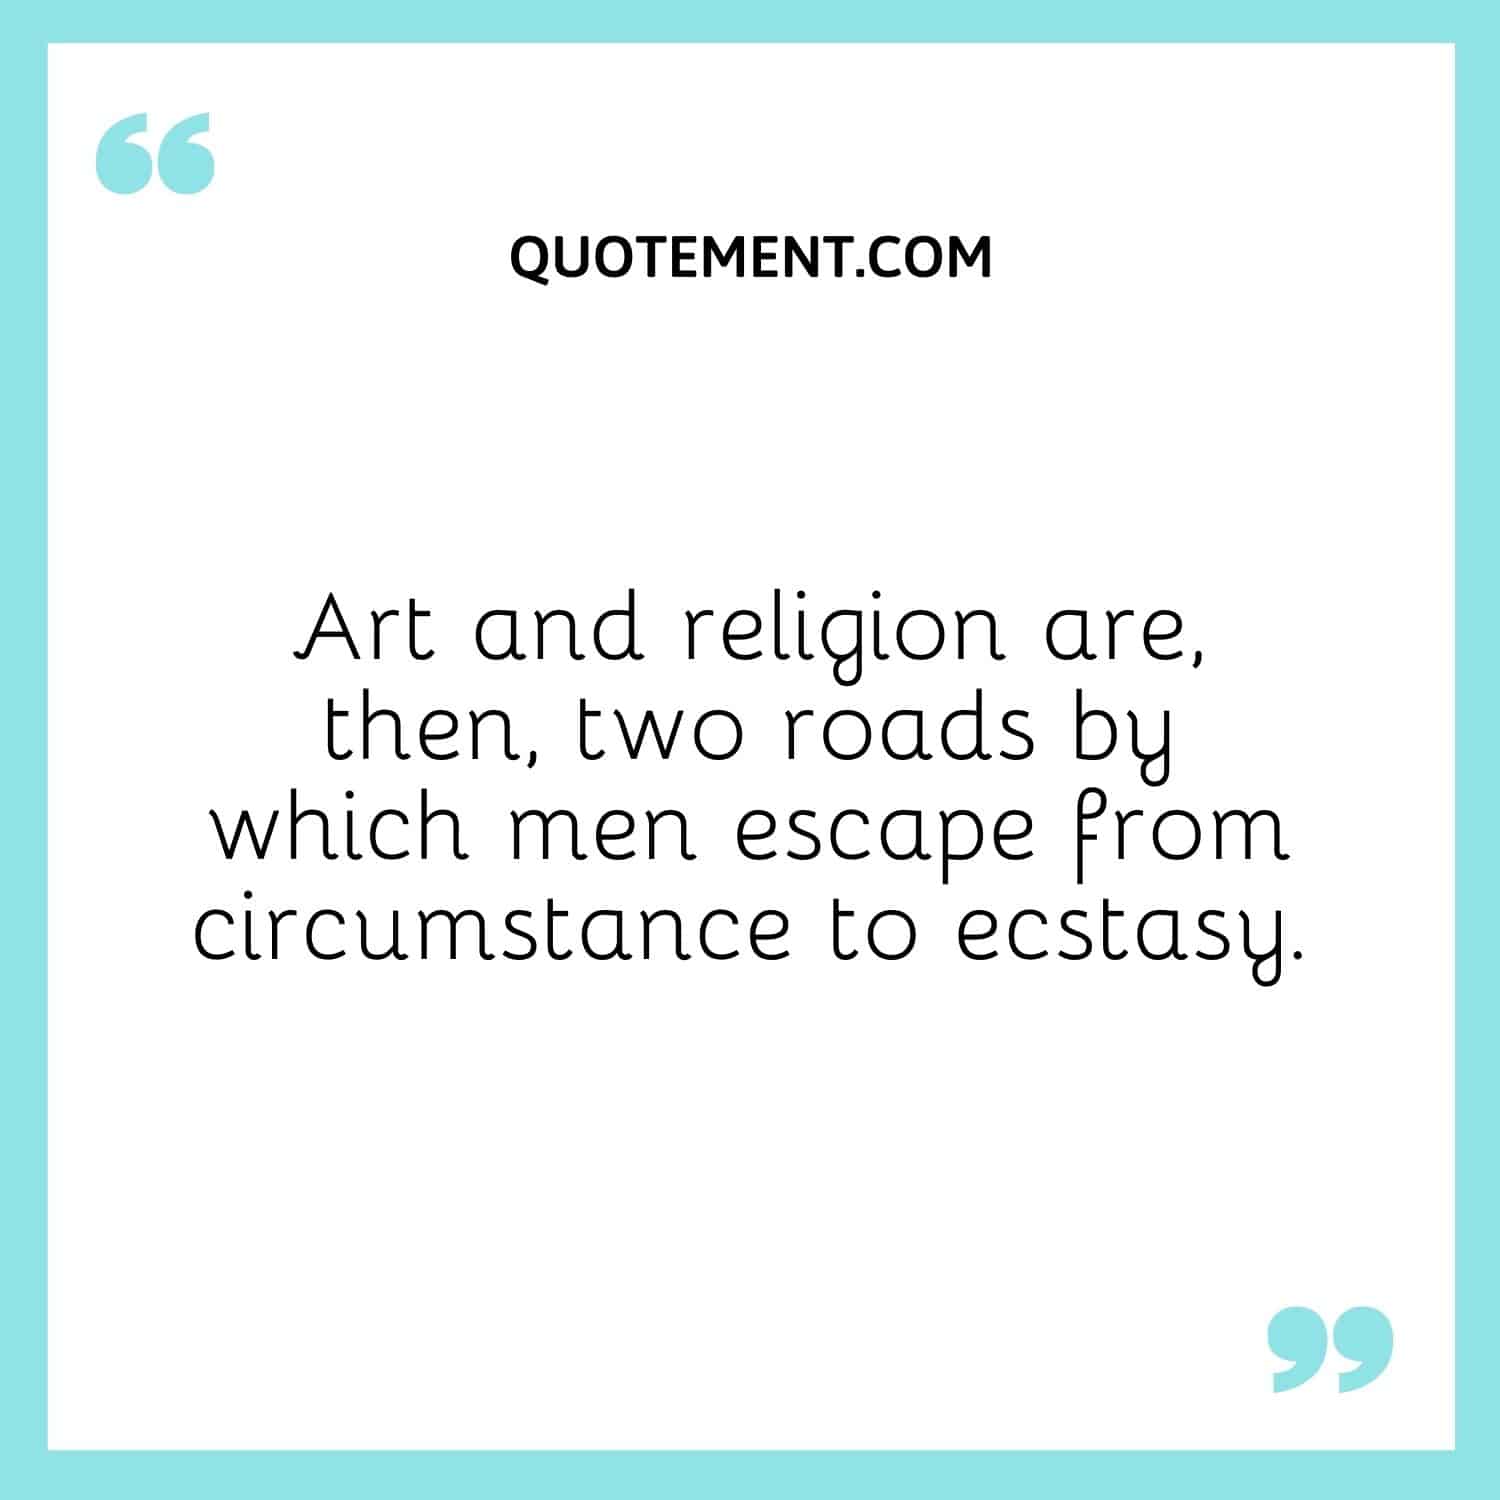 Art and religion are, then, two roads by which men escape from circumstance to ecstasy.